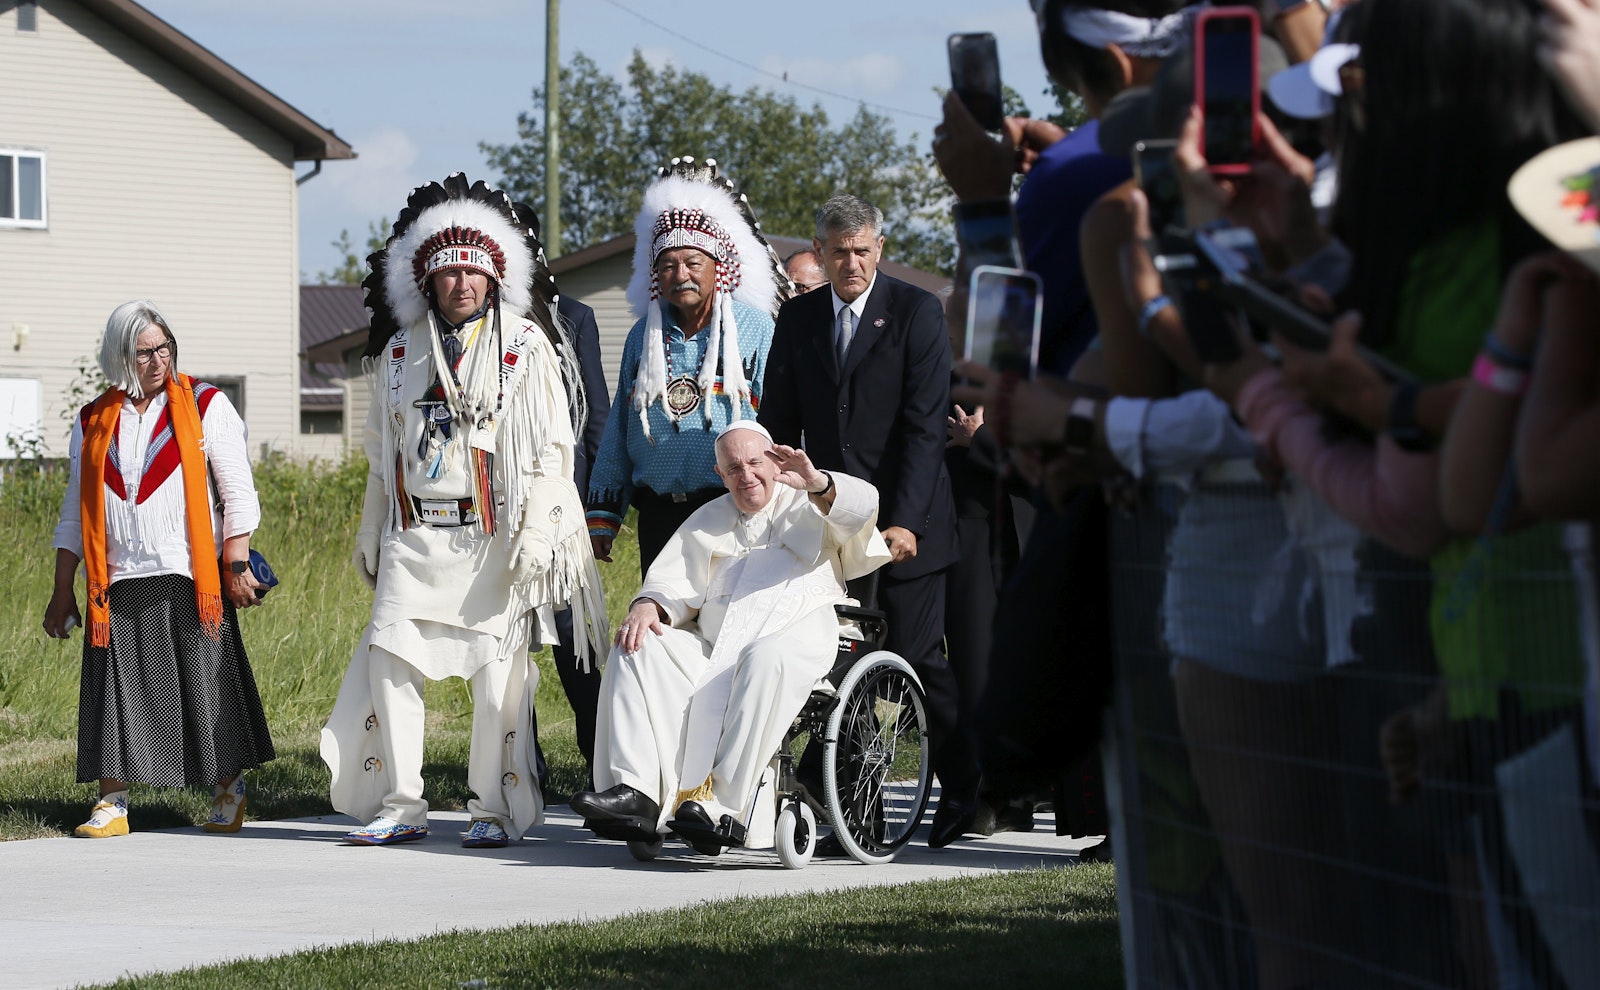 Pope Francis greets the crowd as he arrives at the Lac Ste. Anne pilgrimage and Liturgy of the Word in Lac Ste. Anne, Alberta, July 26, 2022. (CNS photo/Paul Haring)